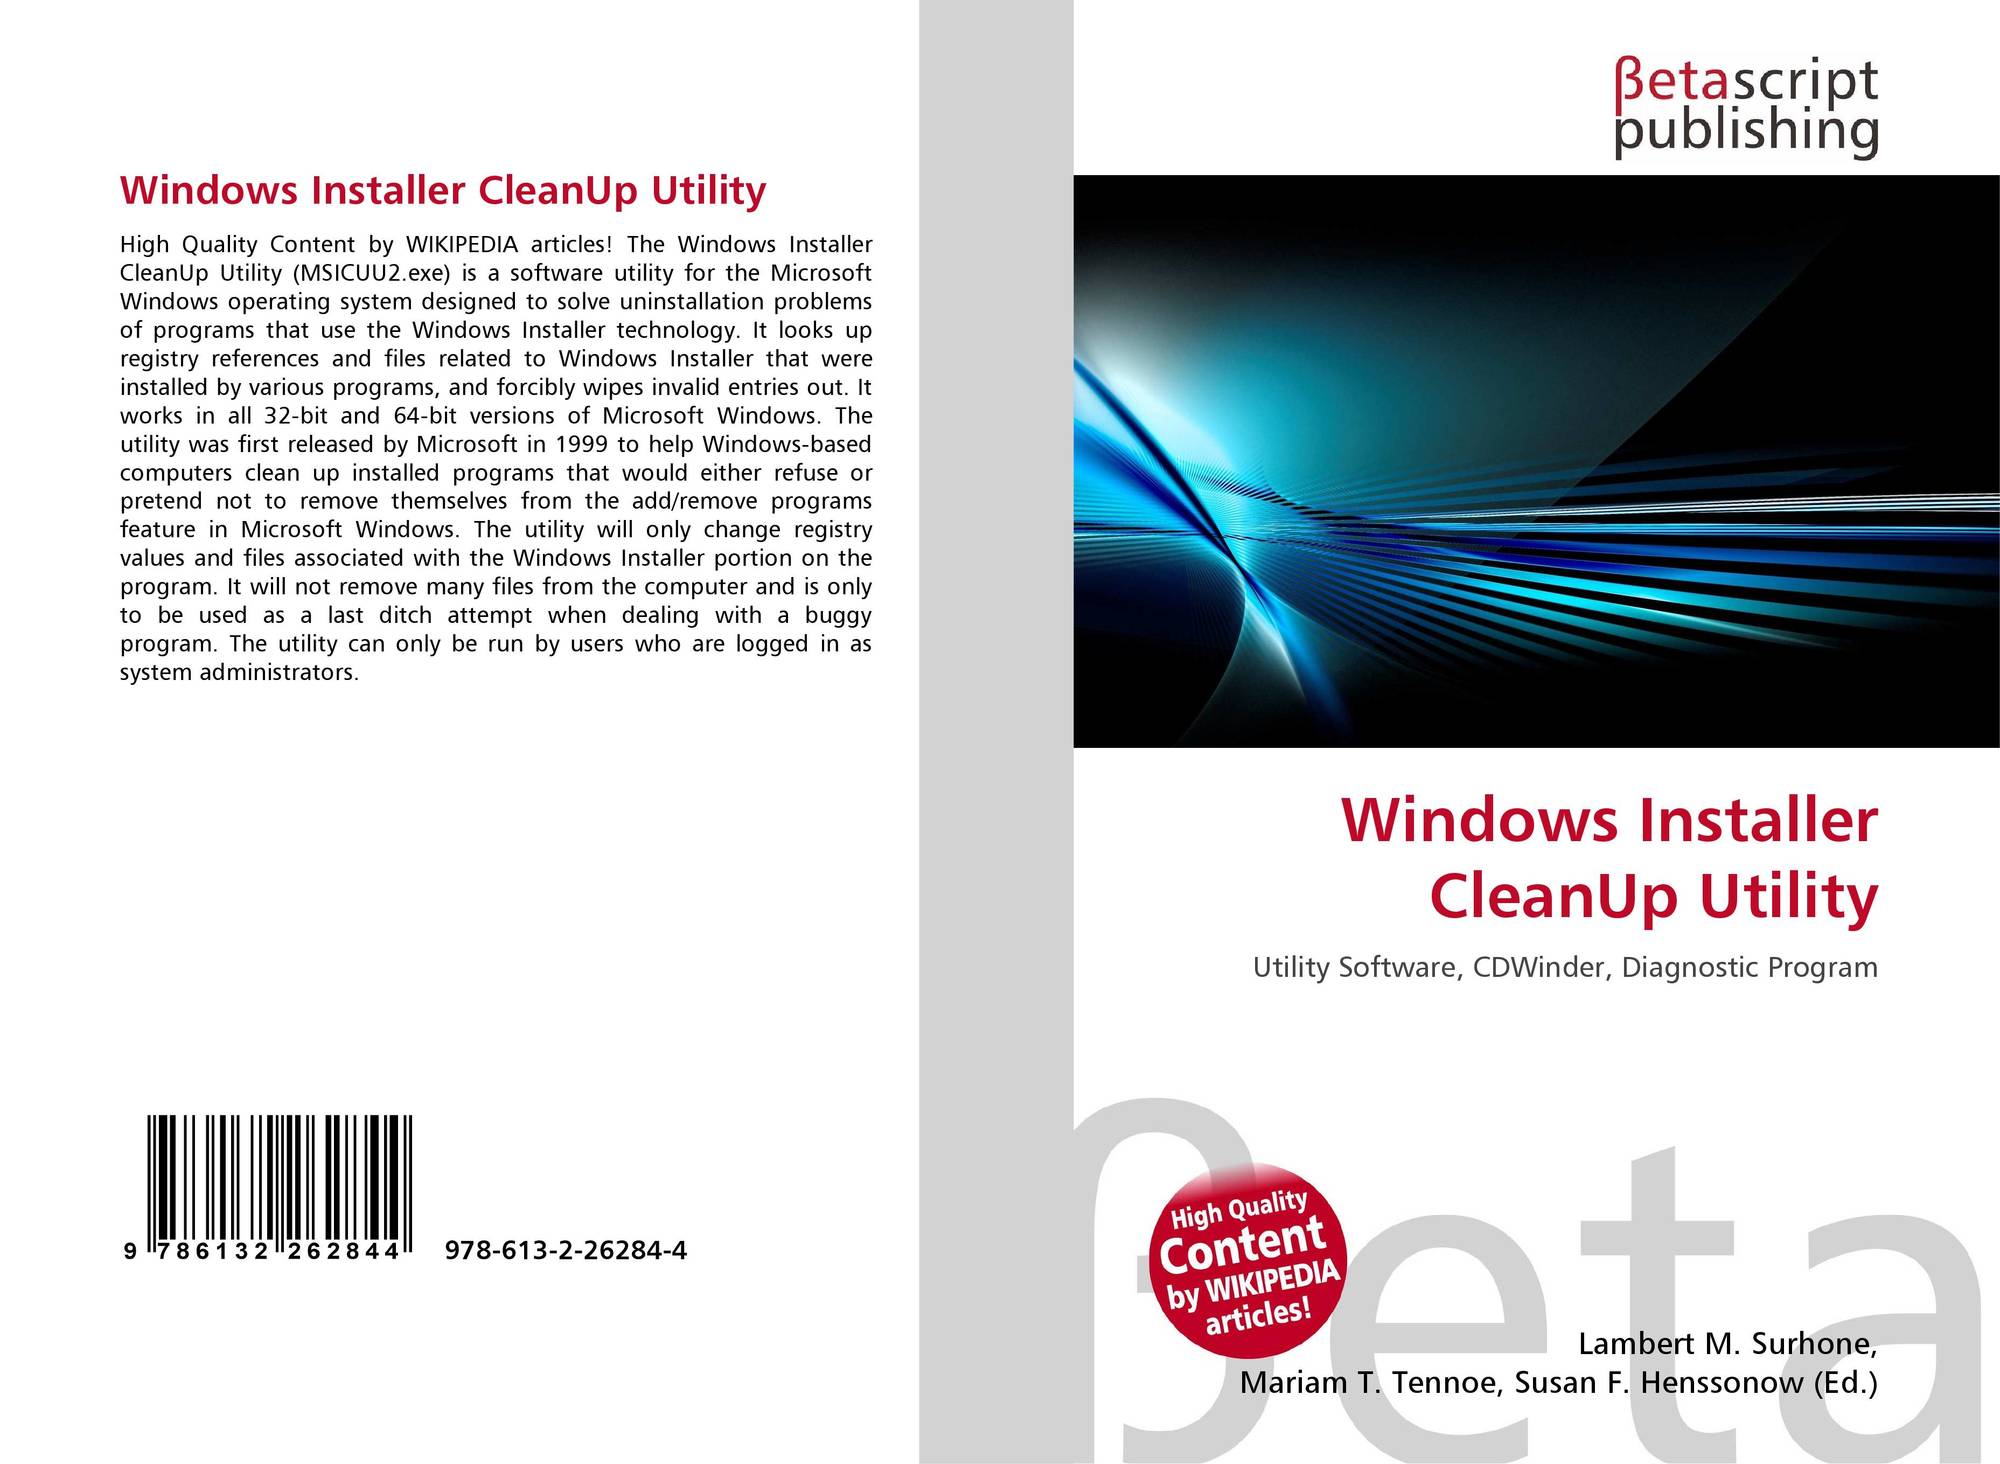 windows fitter cleanup utility wikipedia